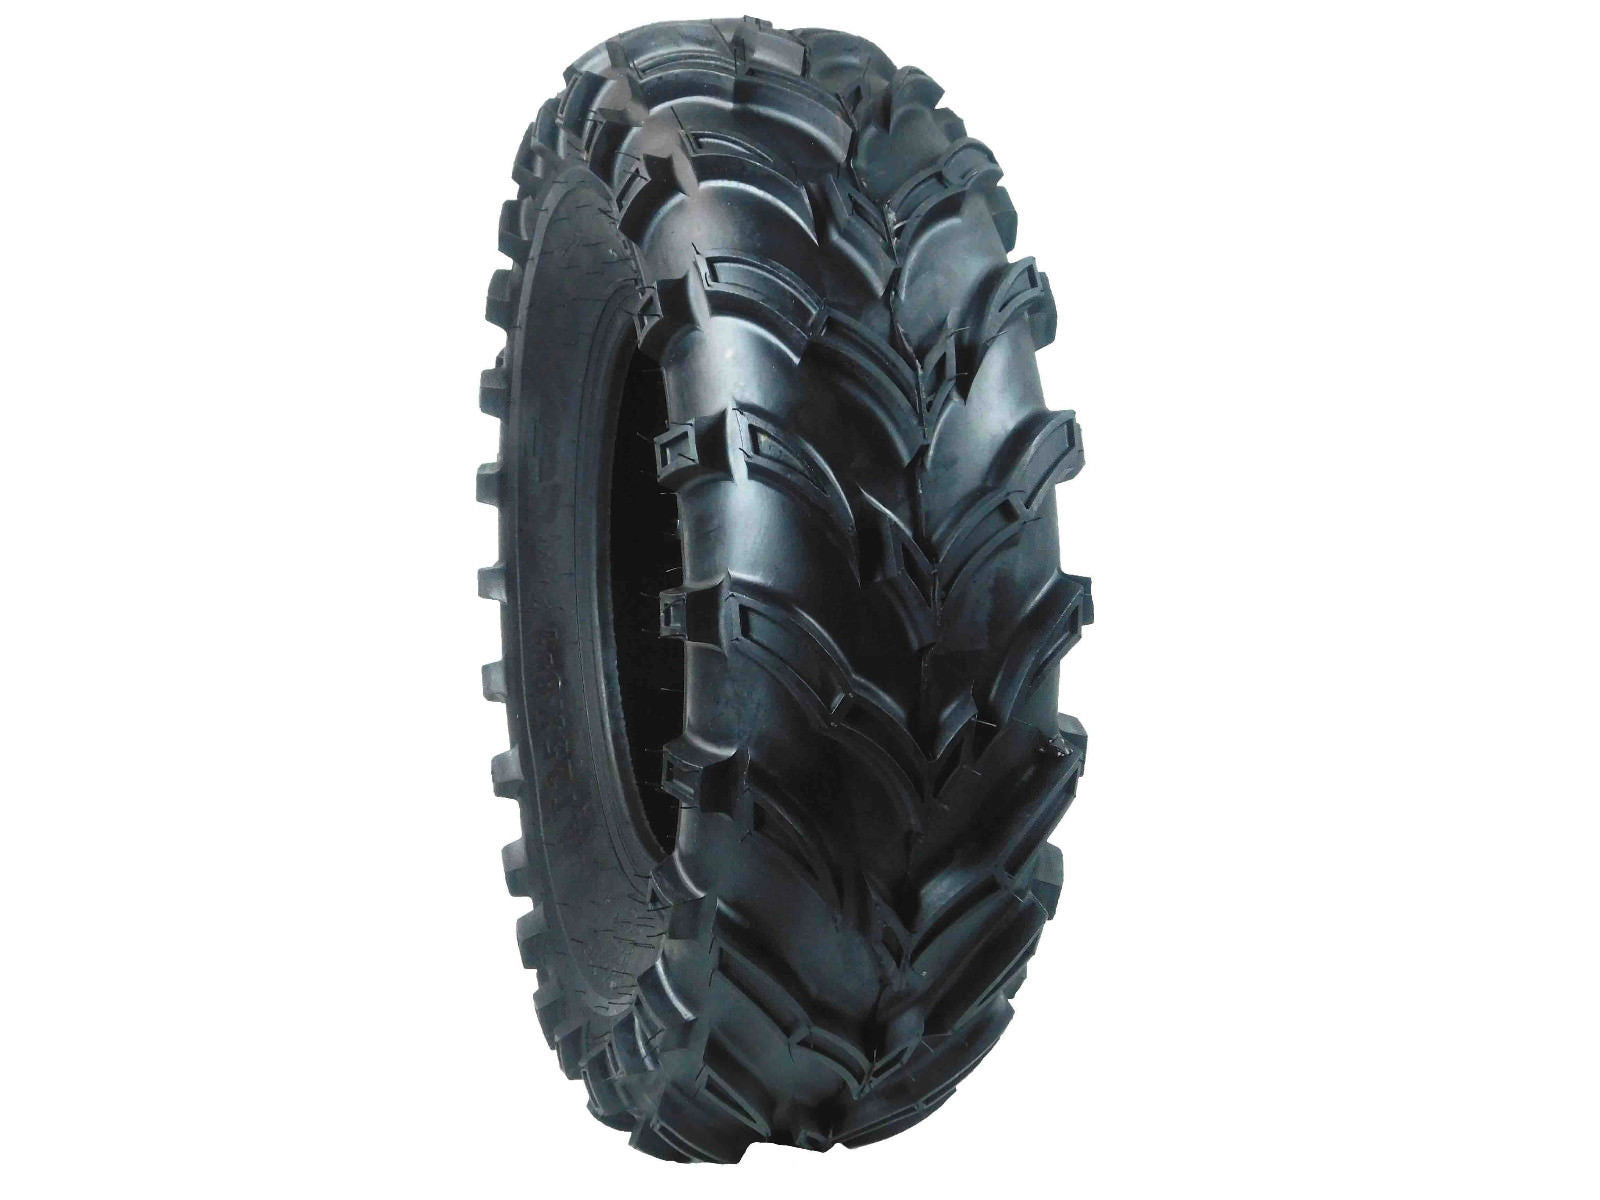 MASSFX ATV MS Tire 2 set 25x8-12 Front 6Ply 25inch